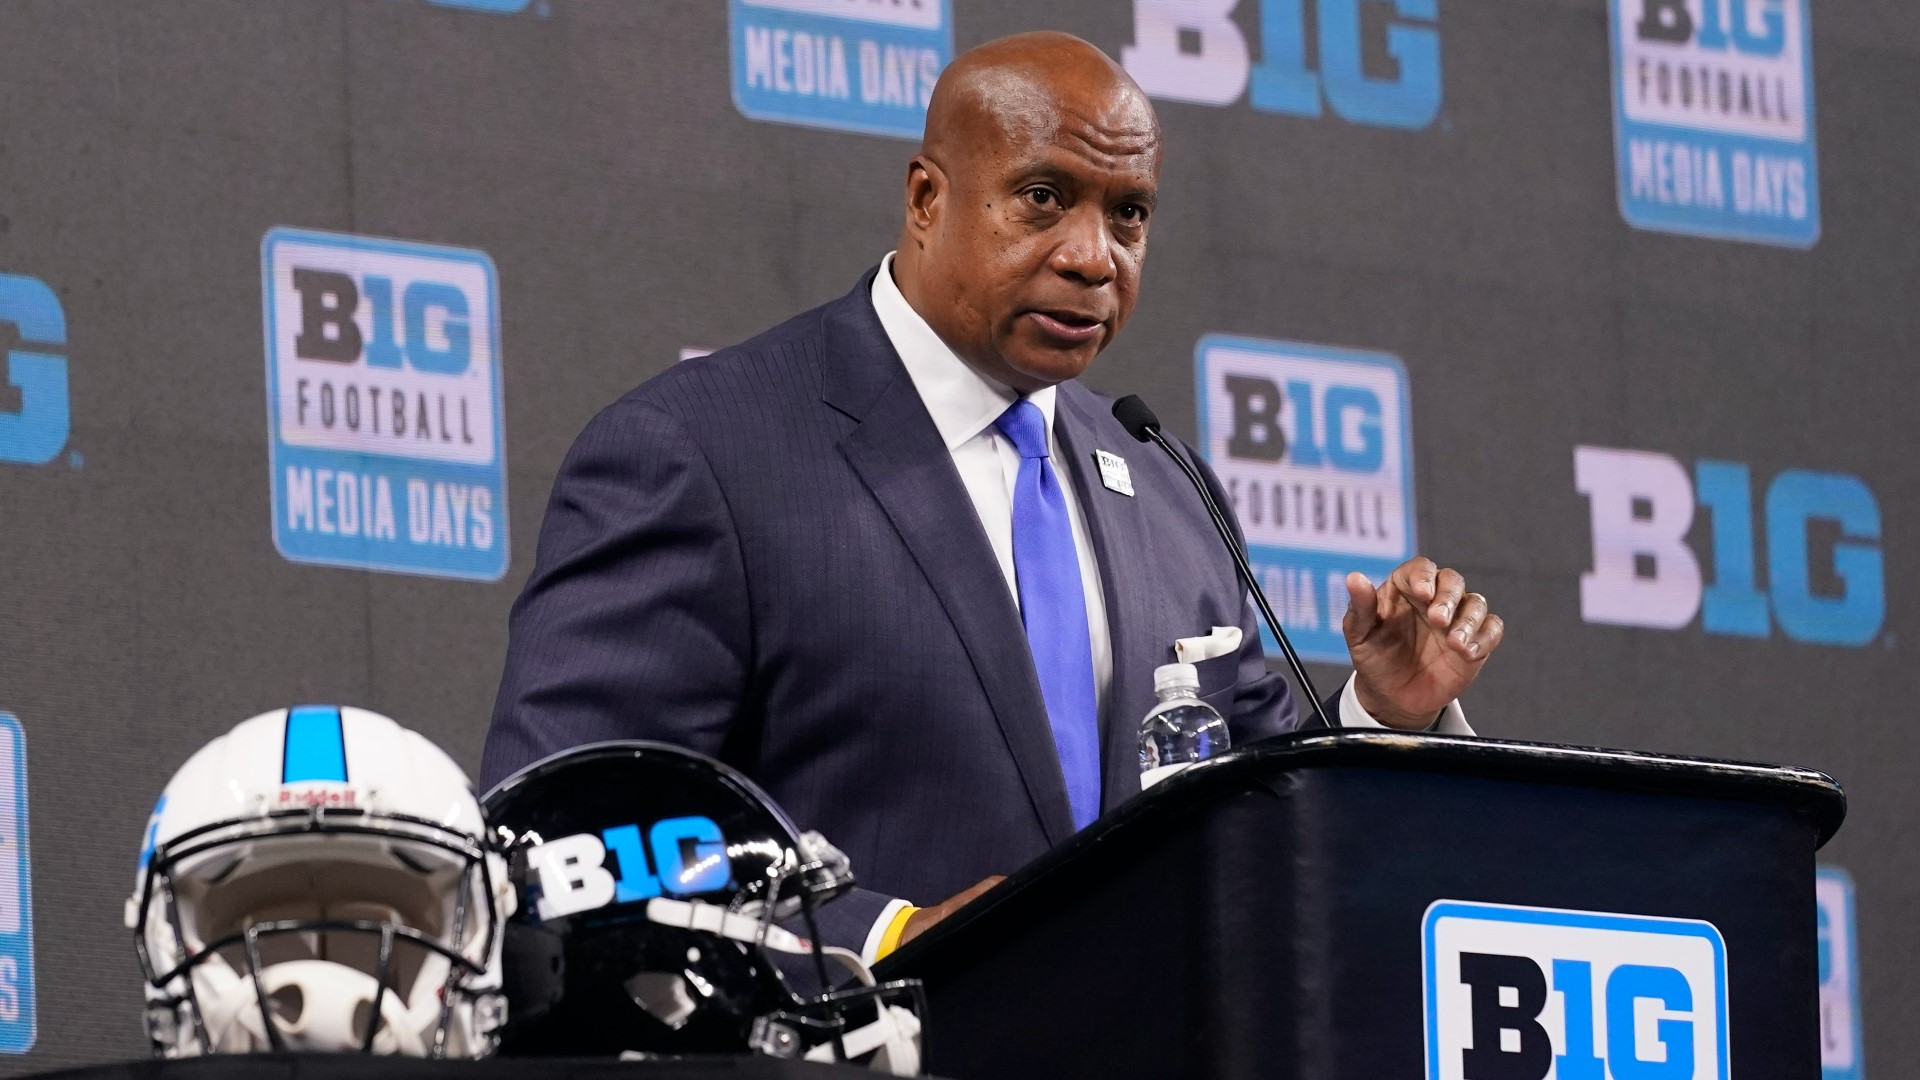 Big Ten Commissioner Kevin Warren answers questions at the opening press conference of Big Ten Media Days.